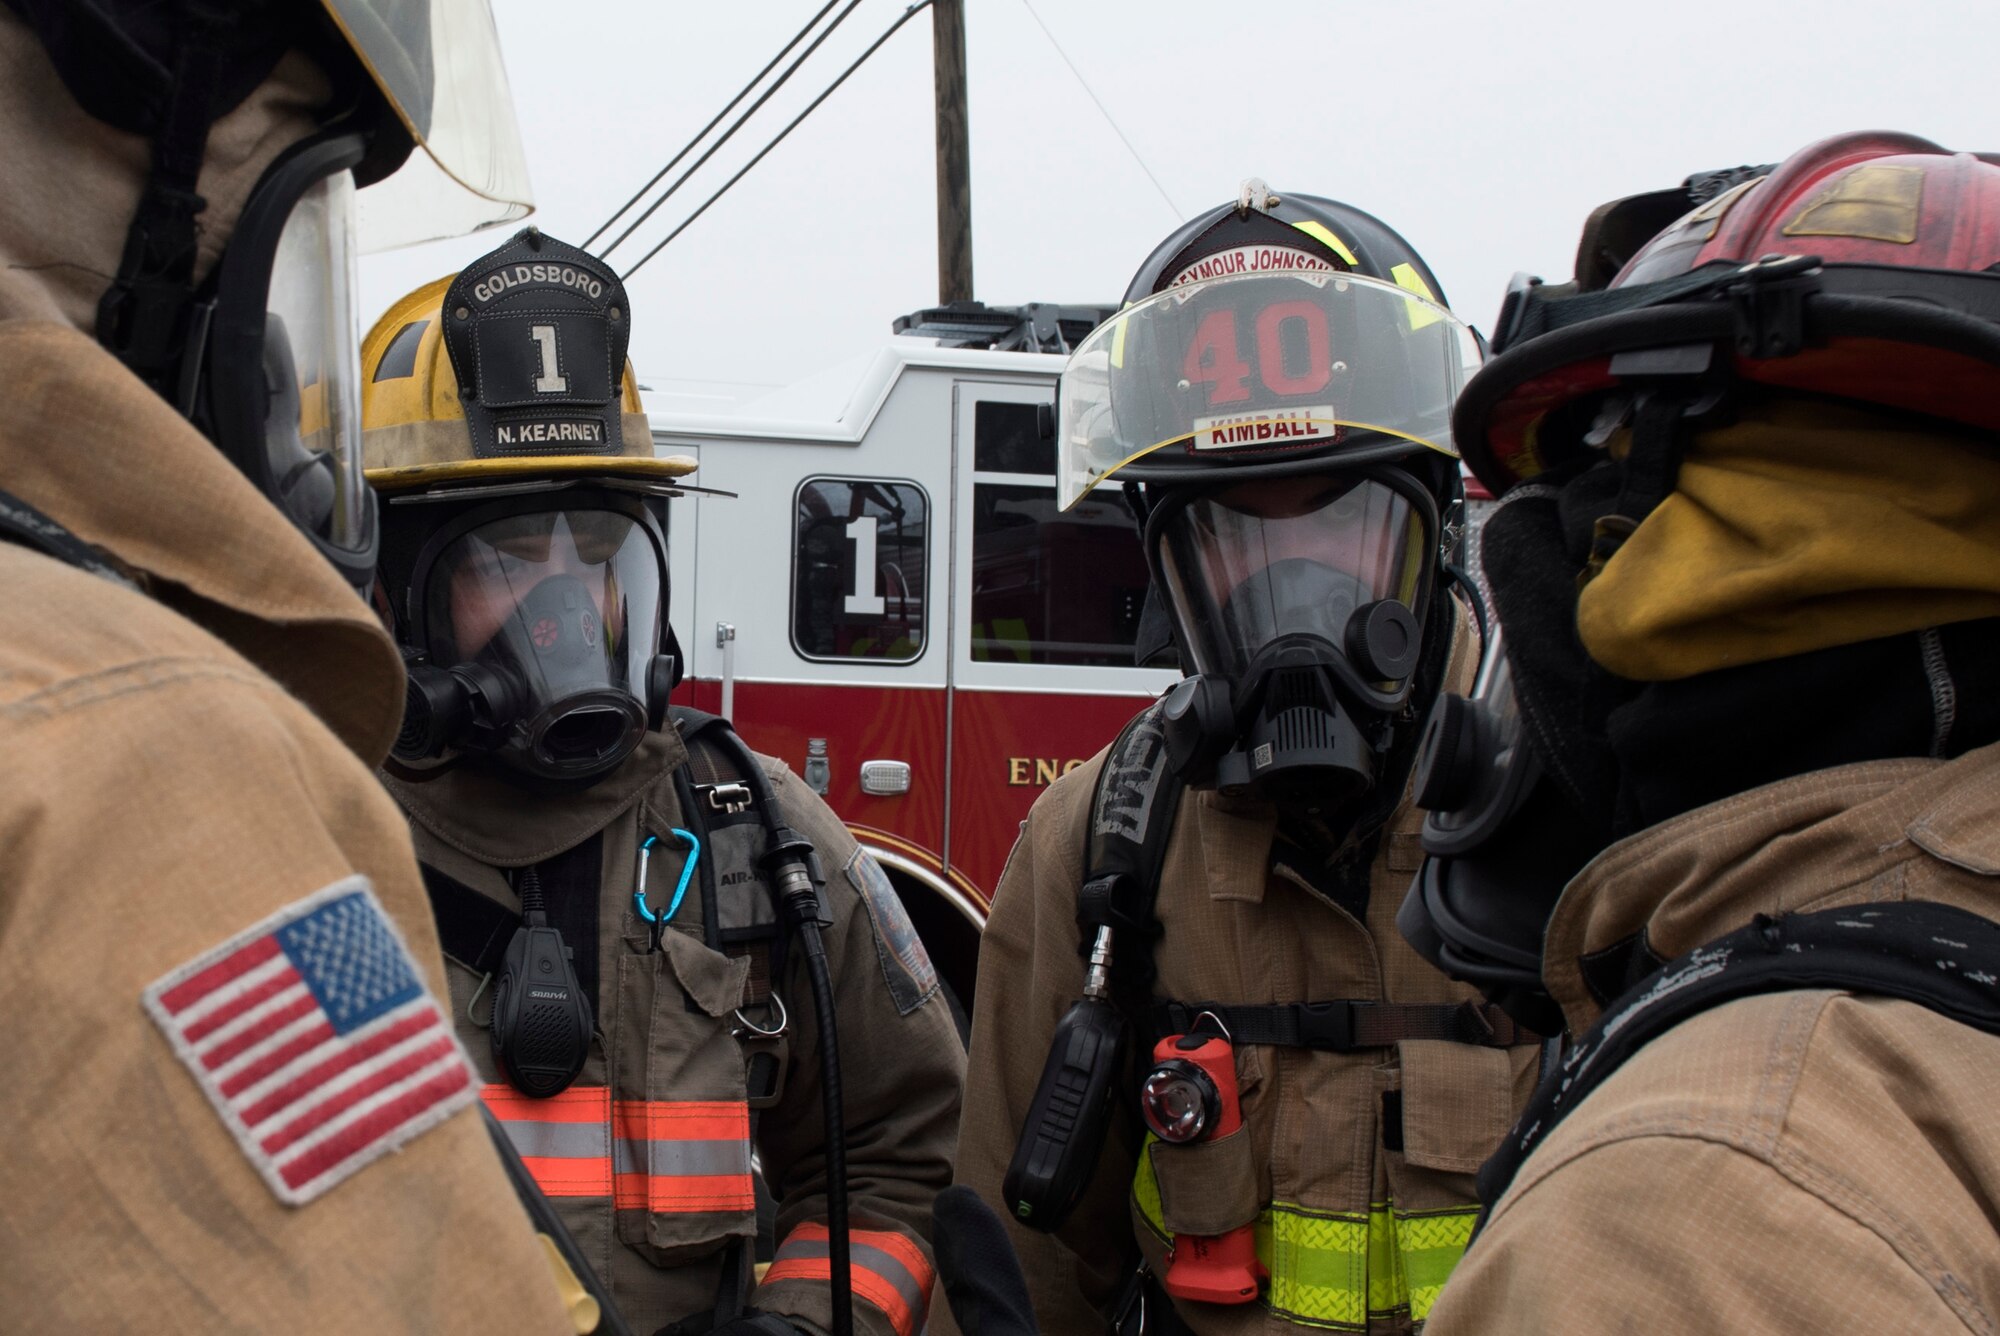 Members of the 4th Civil Engineer Squadron and the Goldsboro Fire Department, receive a brief prior to conducting decontamination procedures during a Hazardous Material Spill Response exercise, Dec. 9, 2019, in Goldsboro, N.C.